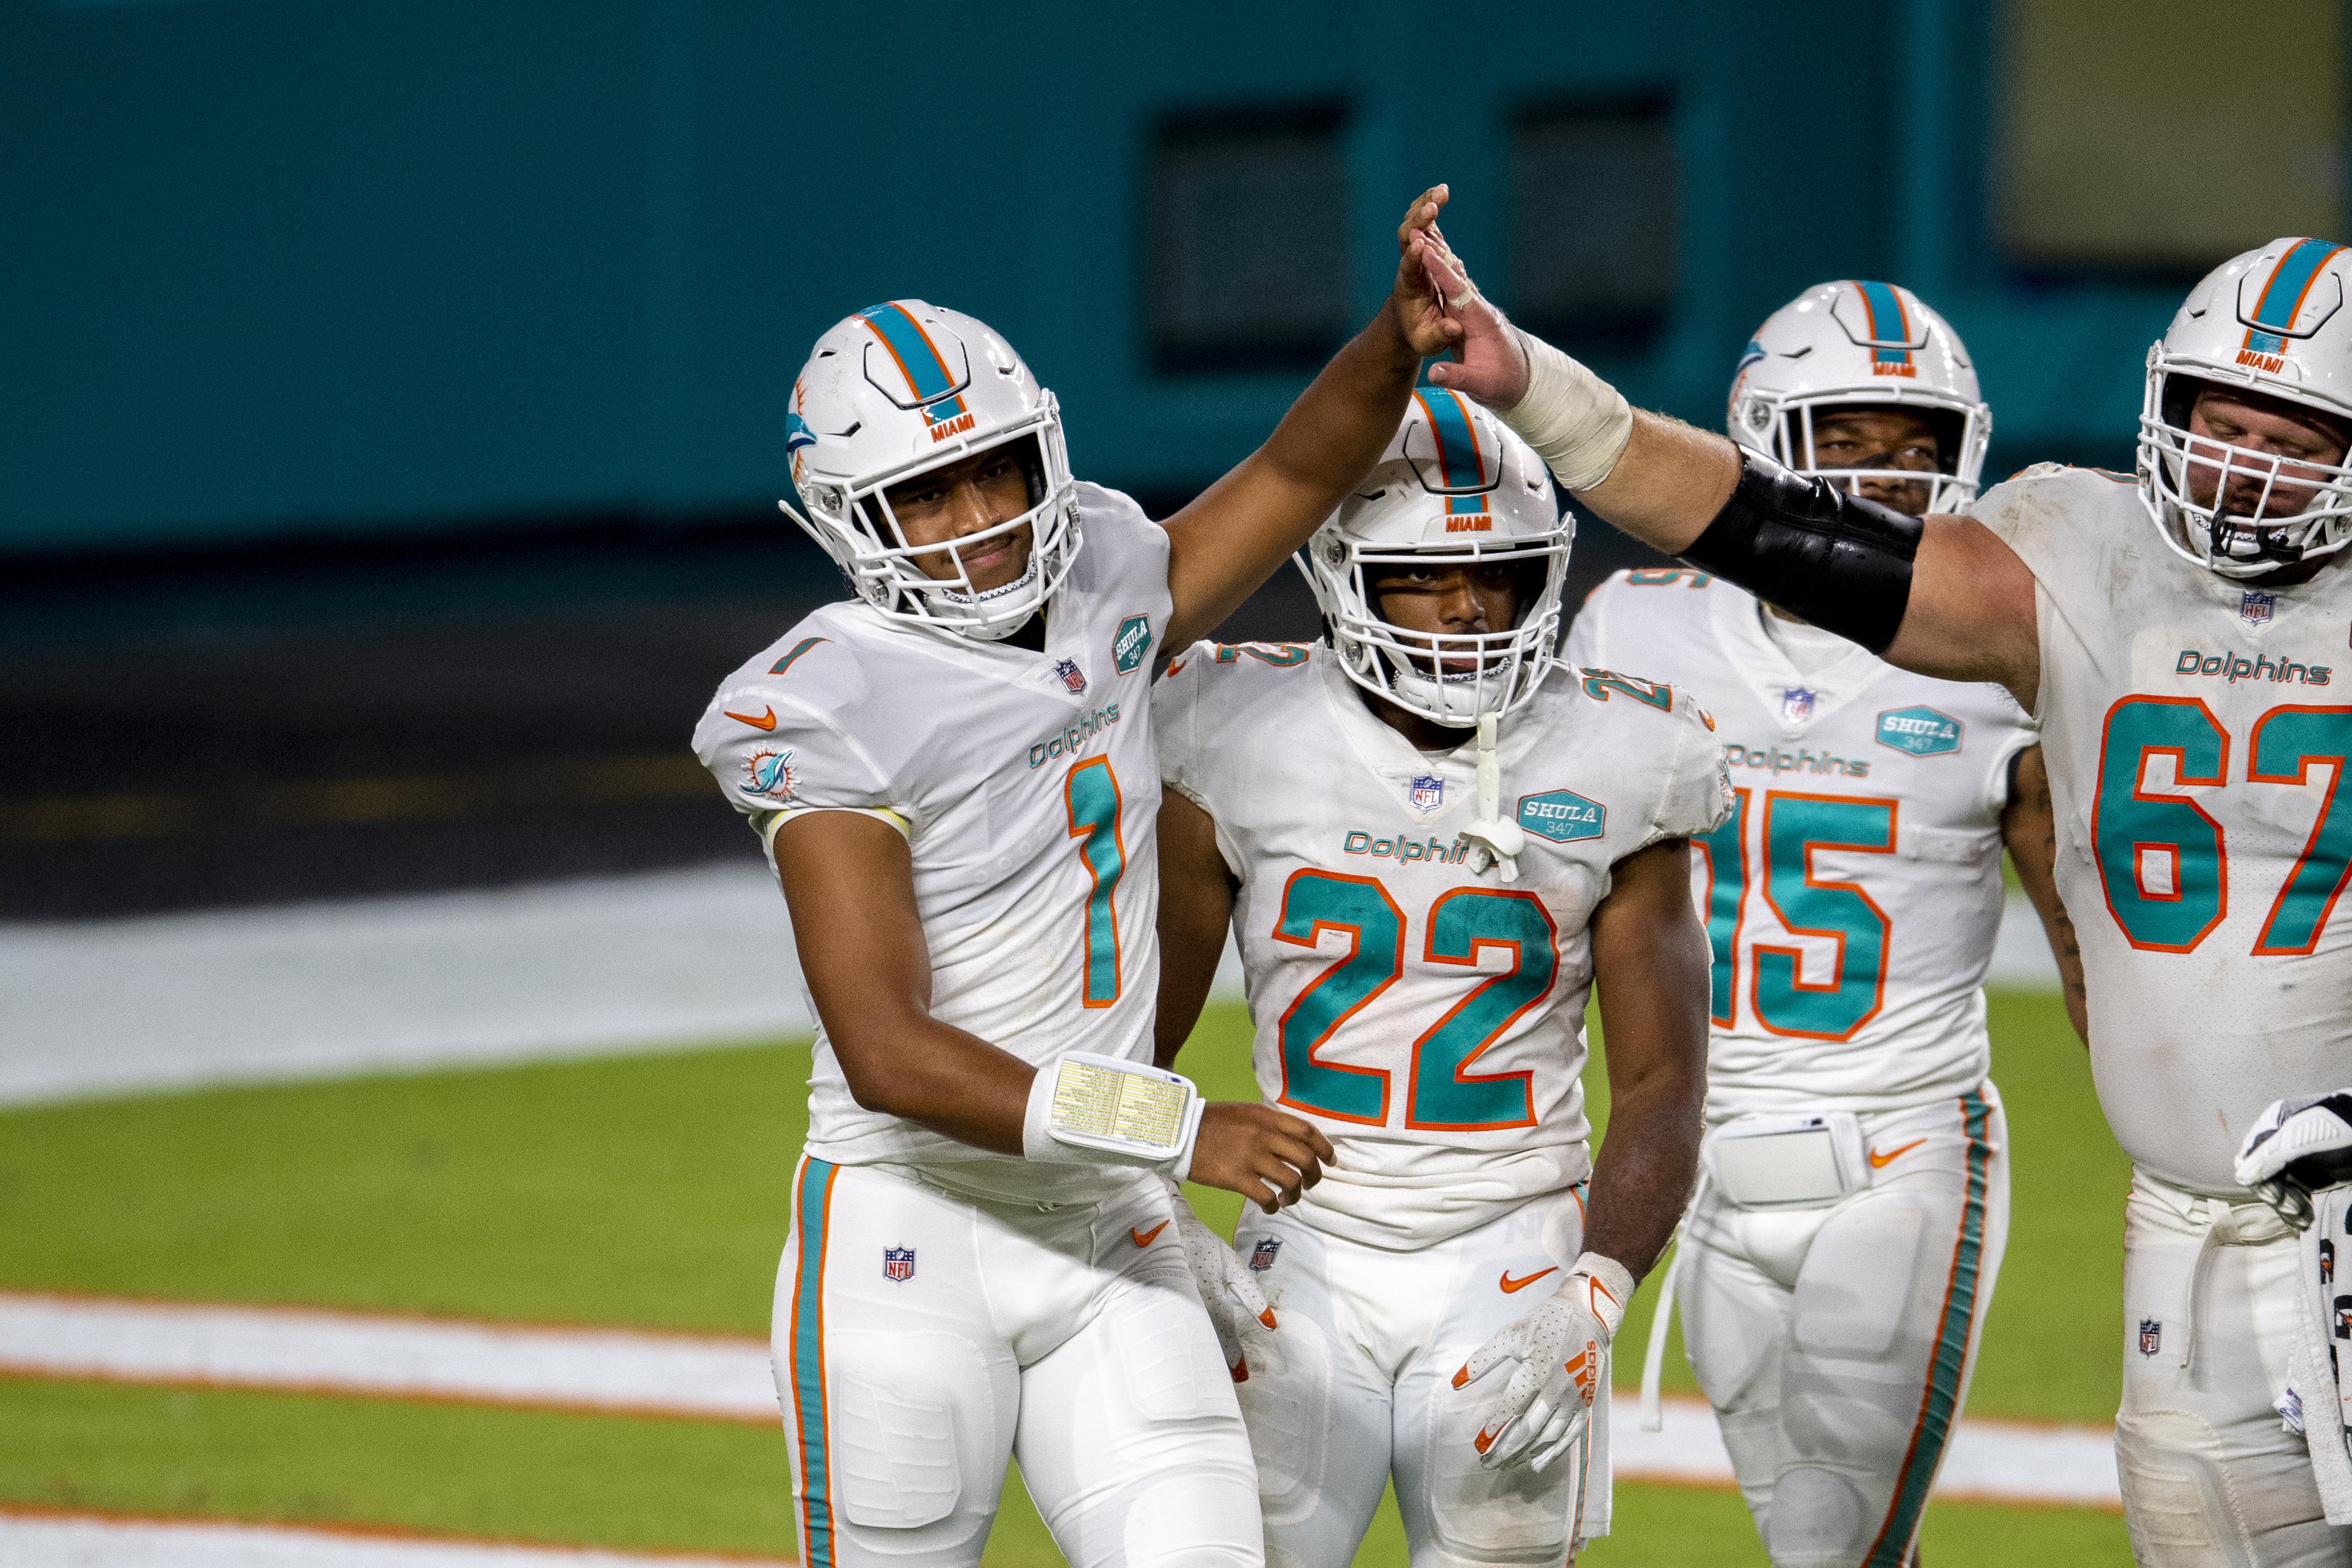 How to Watch, Stream & Listen: Miami Dolphins at Los Angeles Chargers